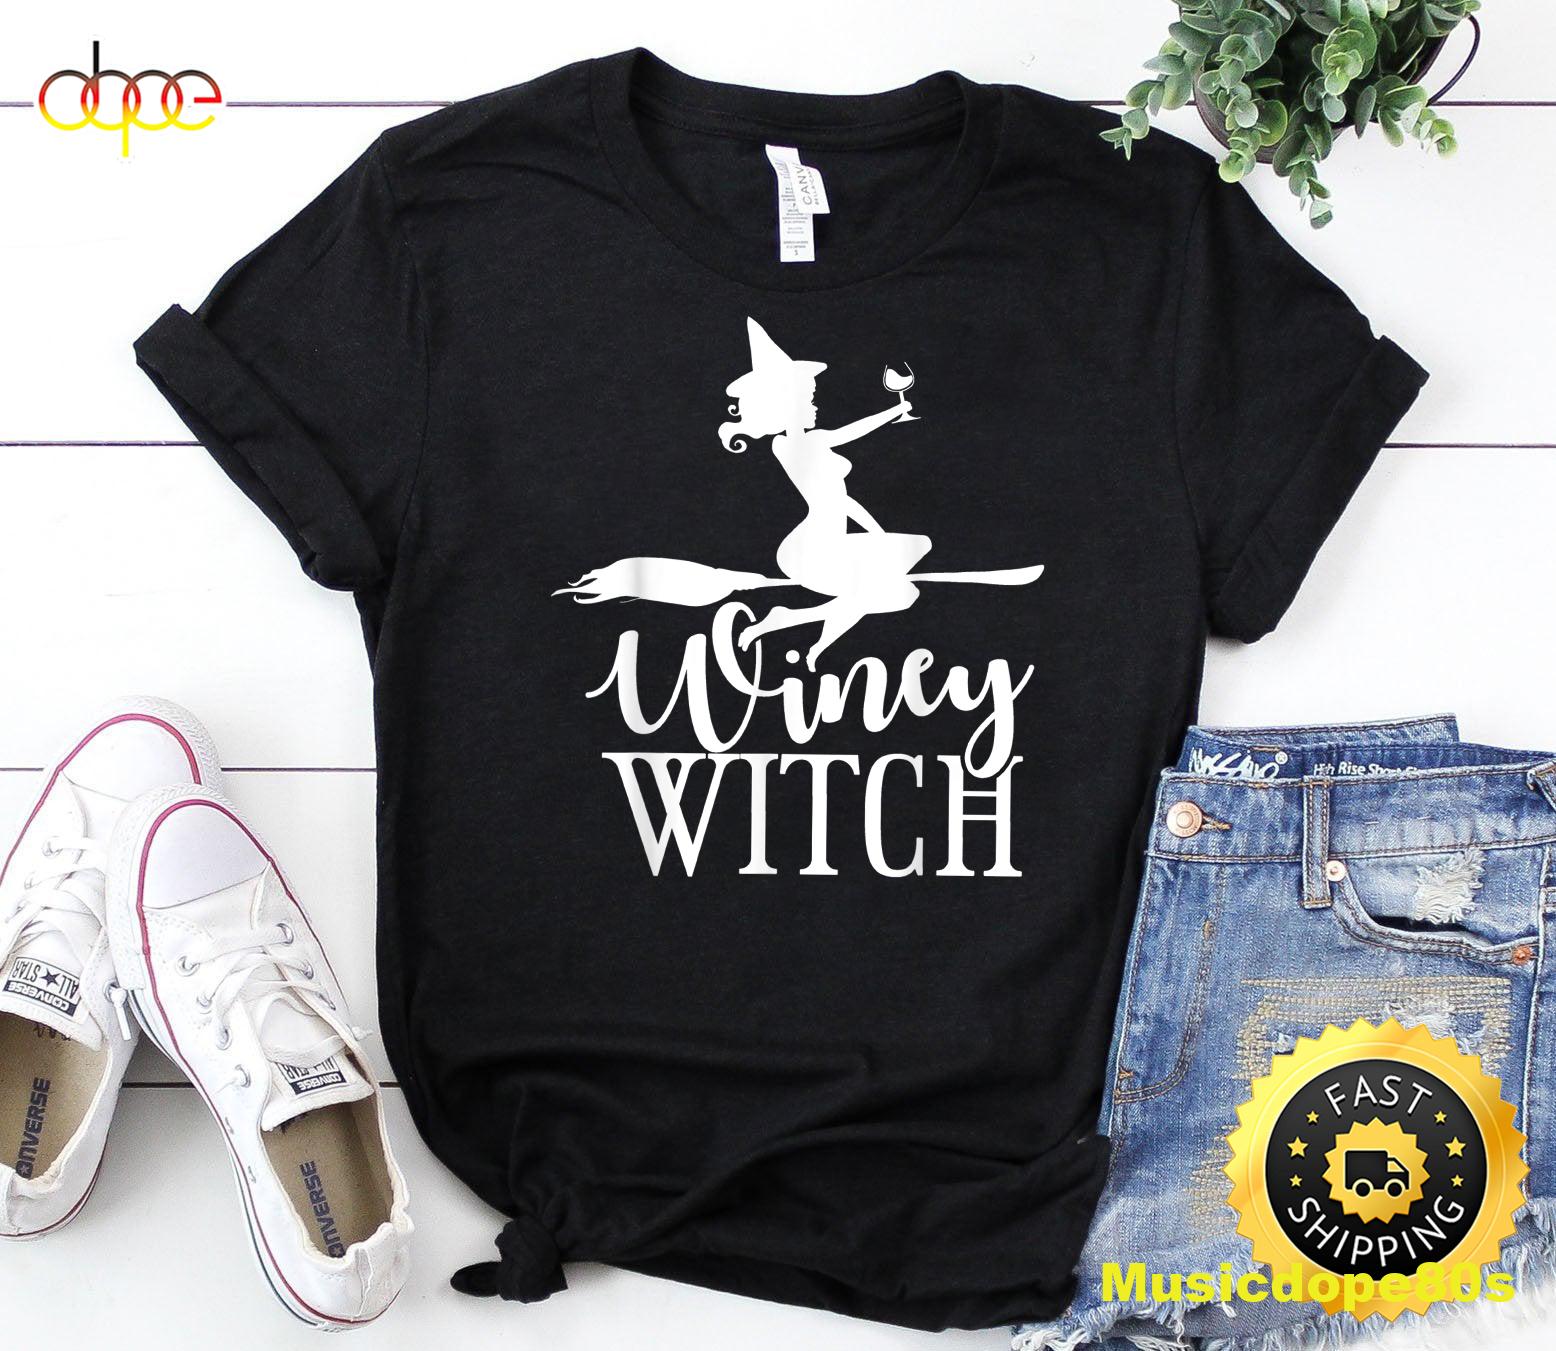 Winey Witch Funny Adult Humor Halloween T Shirt